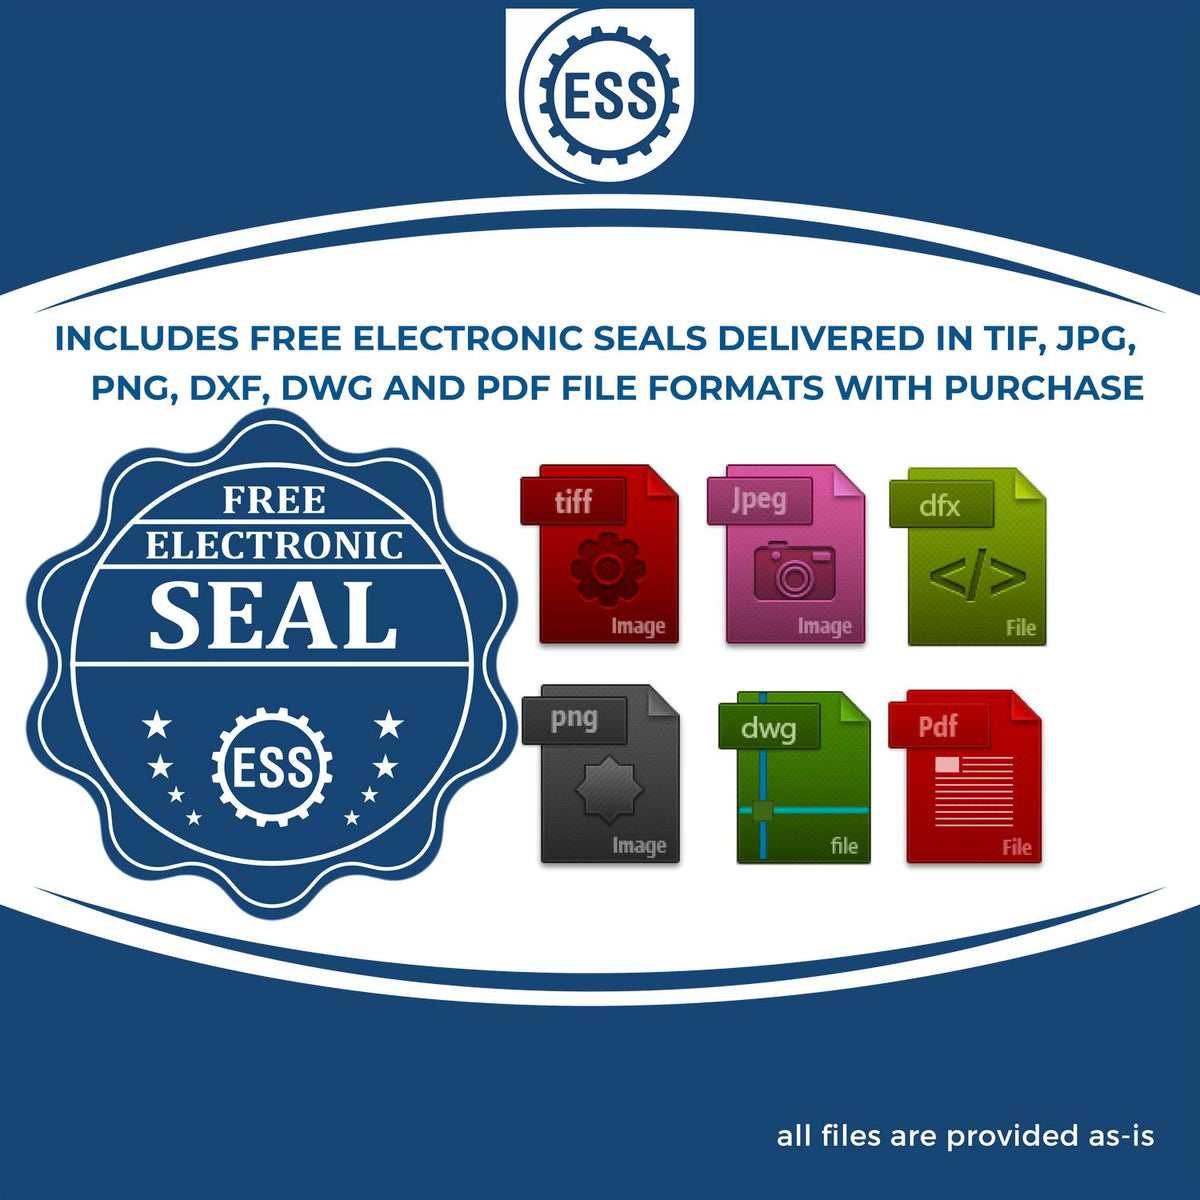 An infographic for the free electronic seal for the Soft Pocket Alaska Landscape Architect Embosser illustrating the different file type icons such as DXF, DWG, TIF, JPG and PNG.